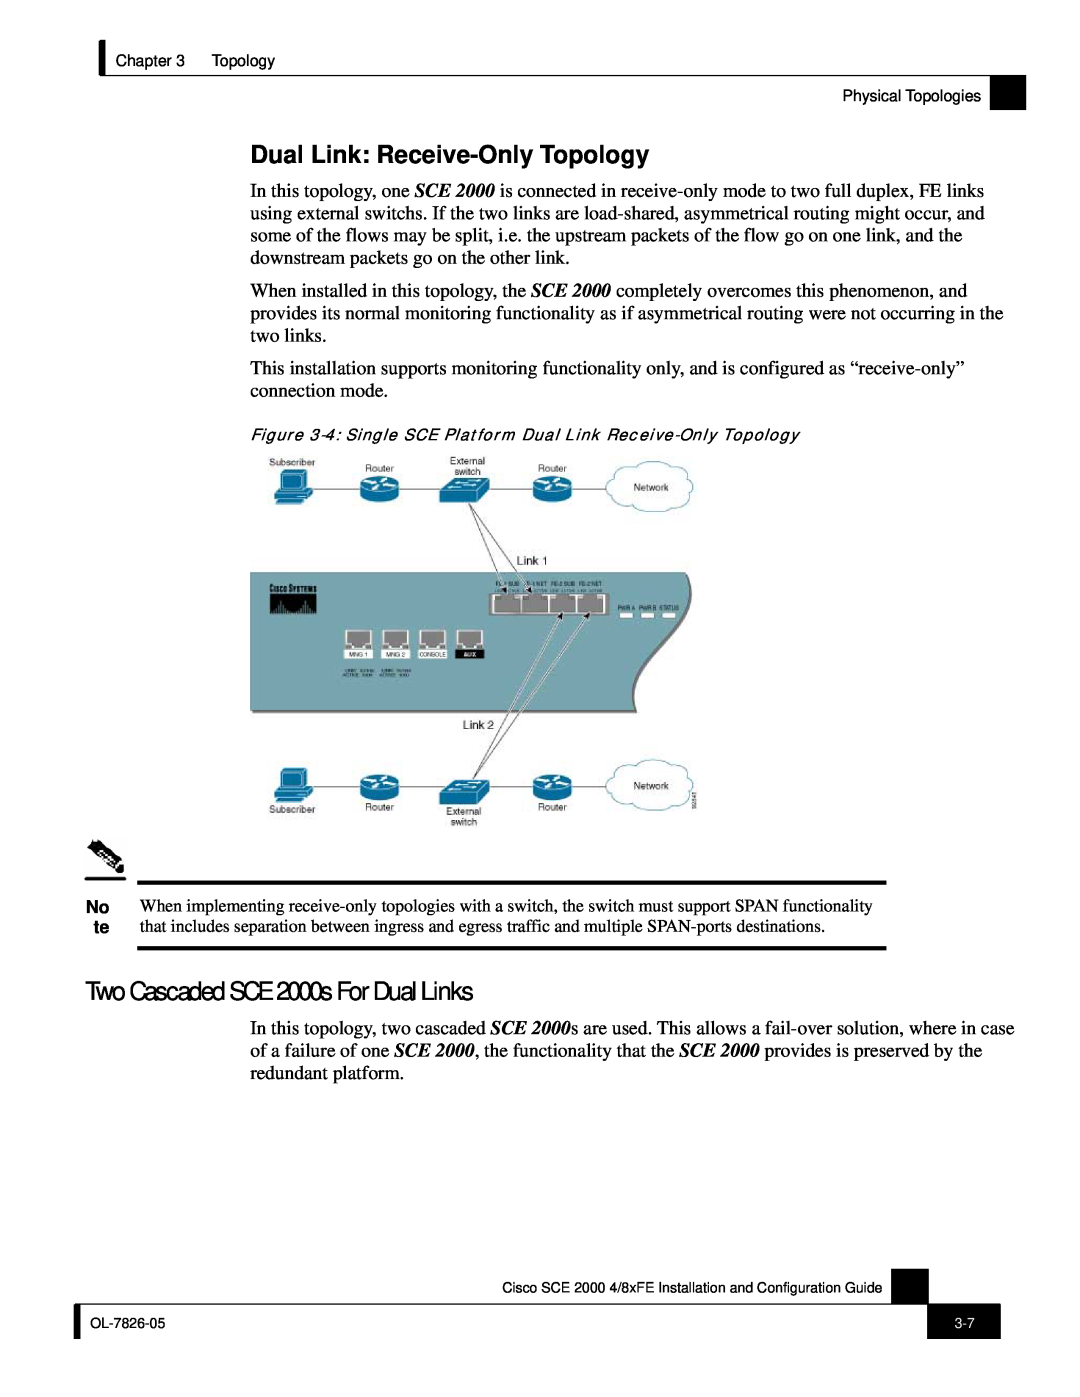 Cisco Systems SCE 2000 4/8xFE manual Two Cascaded SCE 2000s For Dual Links, Dual Link Receive-Only Topology 